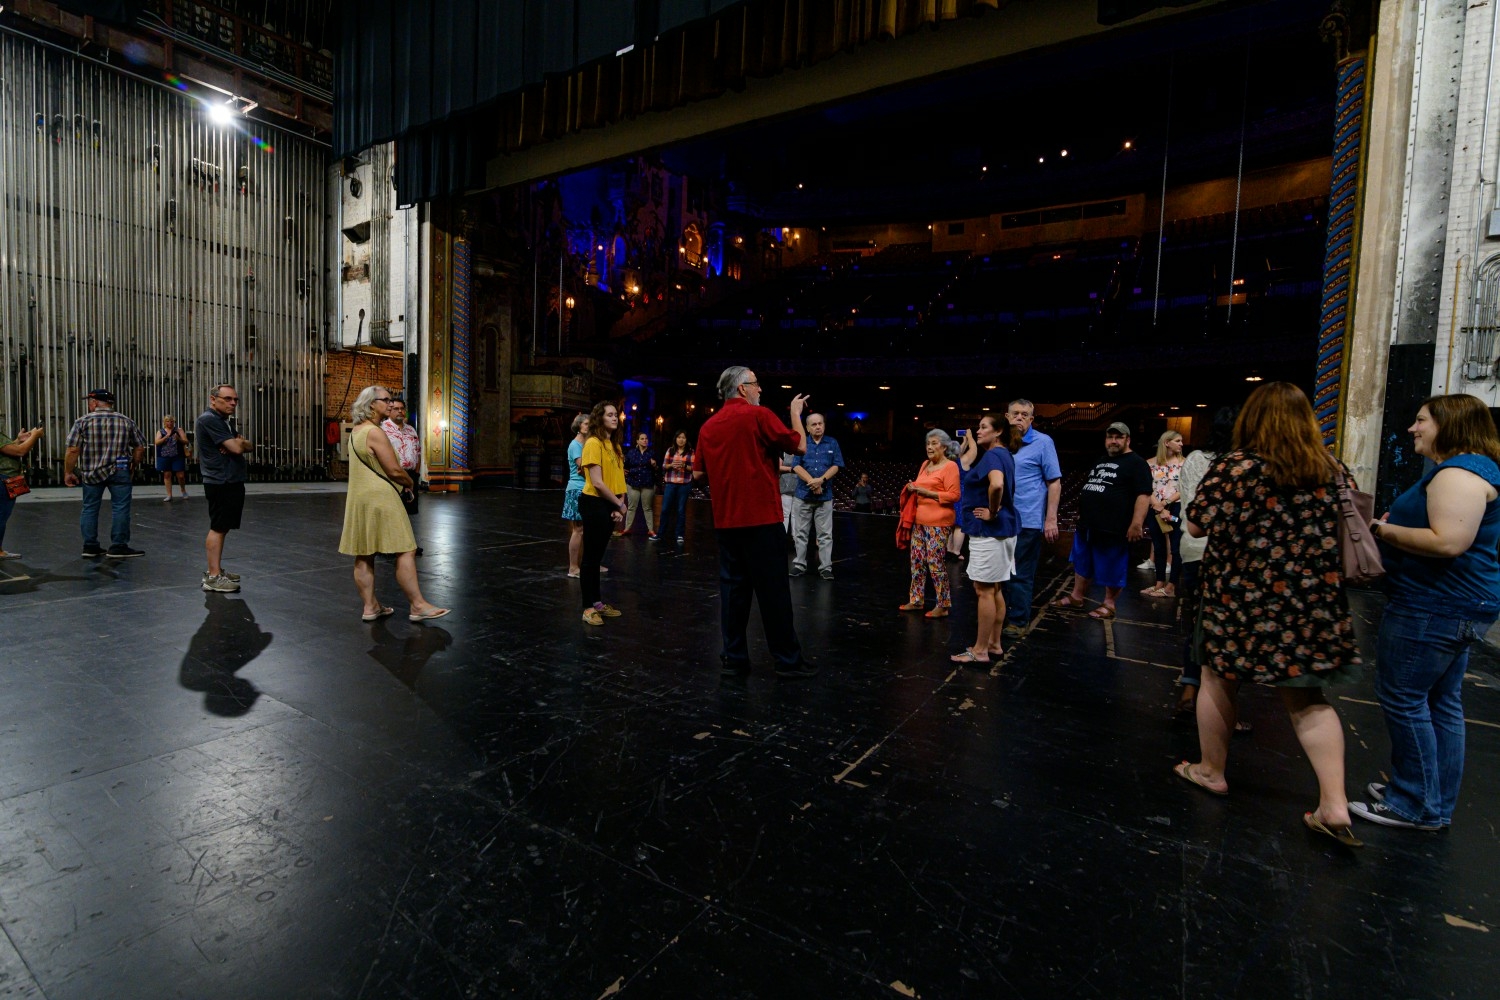 A Backstage Tour at one of ATG's U.S. venues.